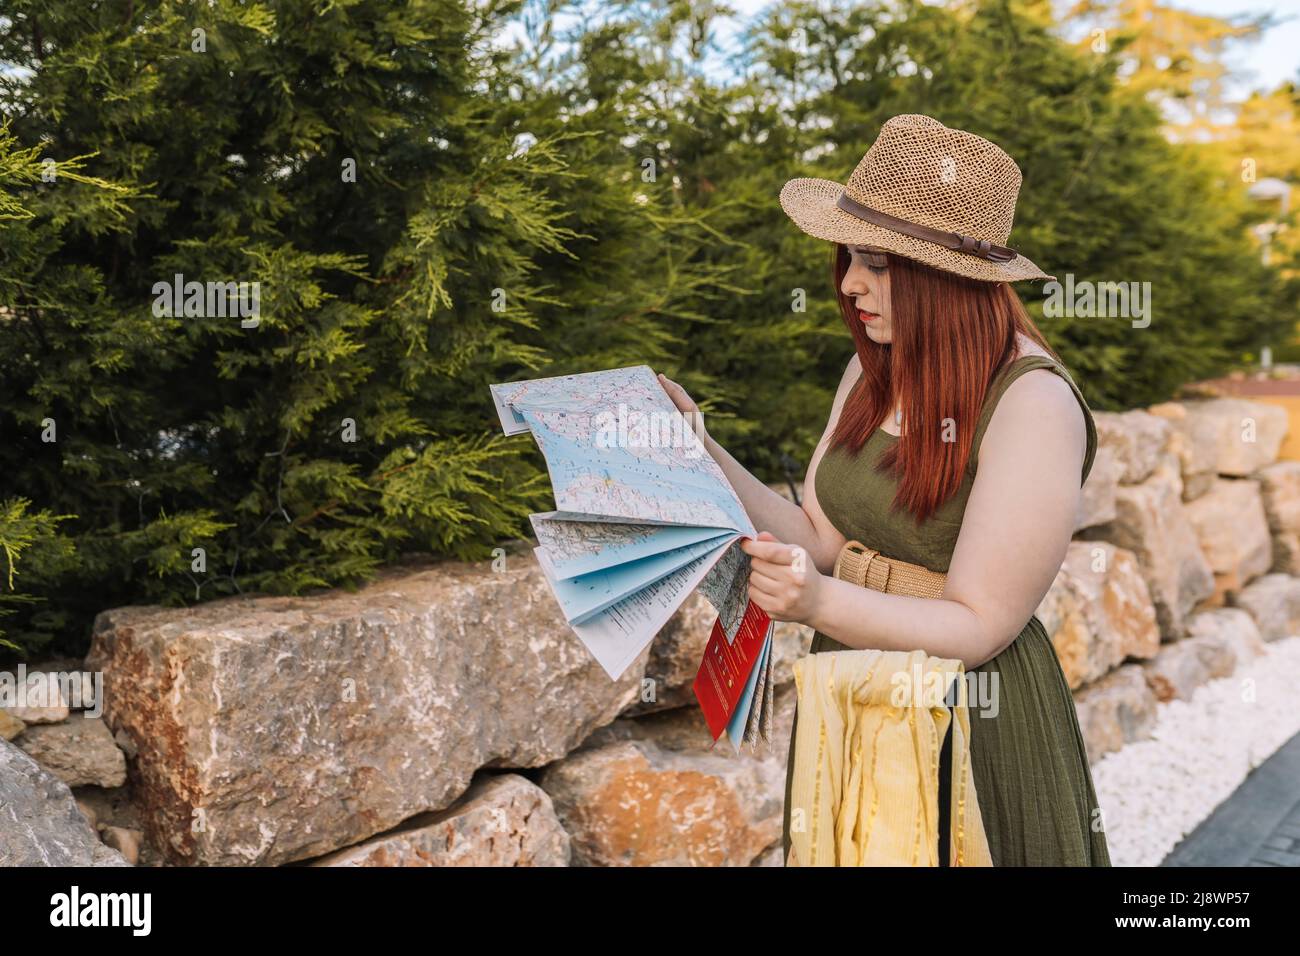 young girl travelling, lost, looking for directions to her holiday destination on a map. tourist asking for directions. Stock Photo